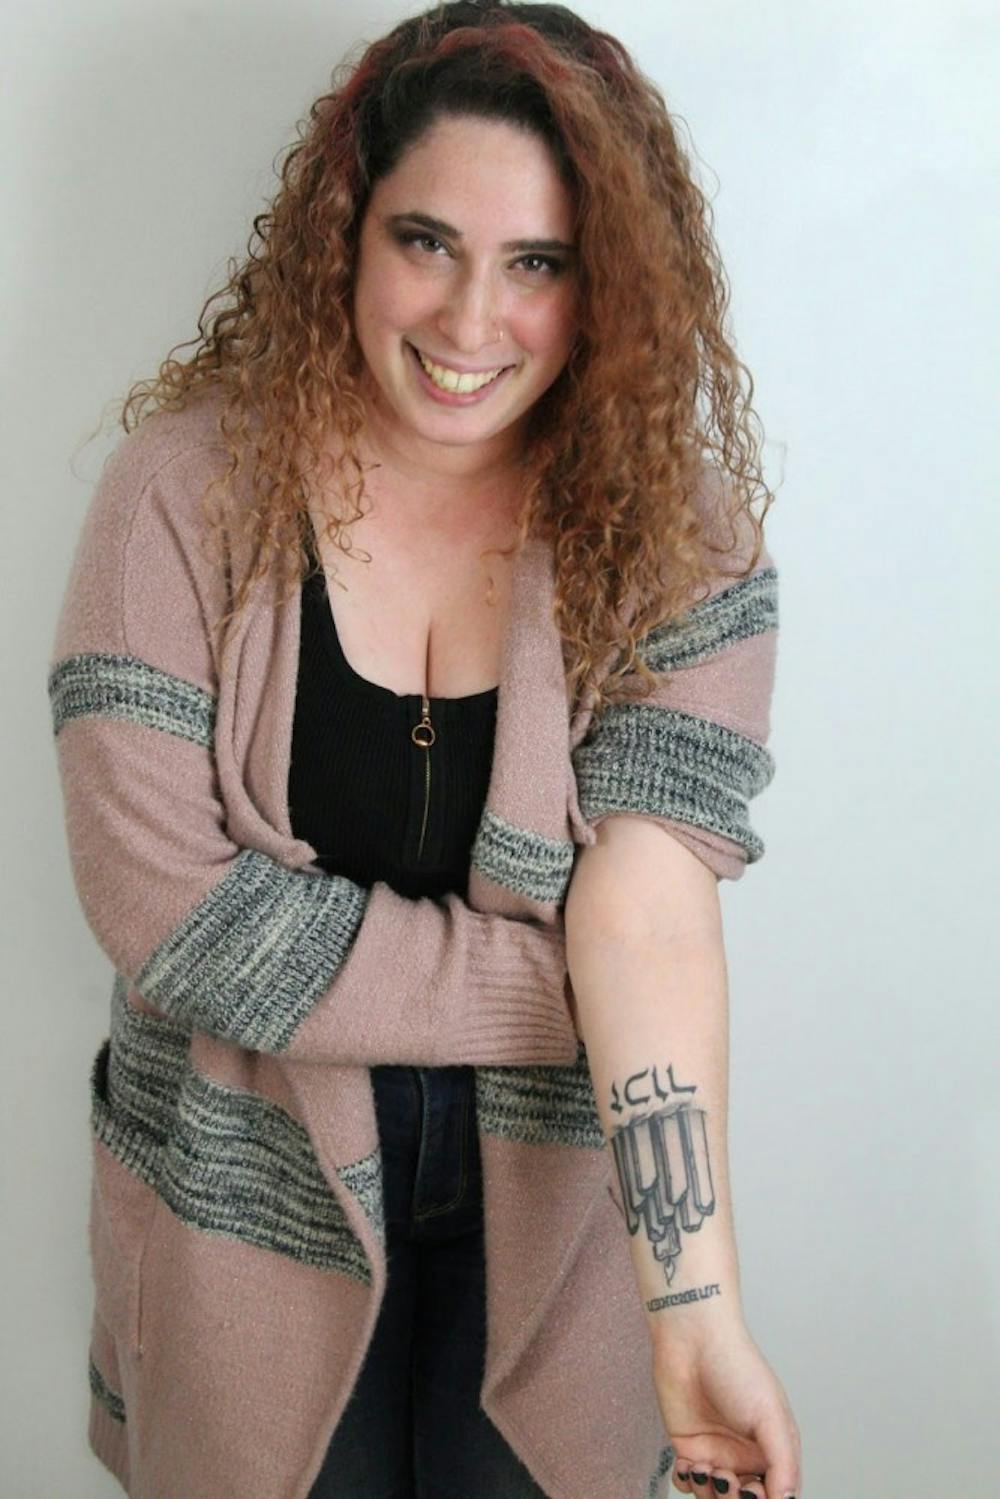 <p>Sarah Bienstock, UB psychology major, photographed with two of her tattoos. The columns represent the lives of Jewish children cut short in the Holocaust and underneath is the Hebrew word “Zachor” or “remember.”</p>